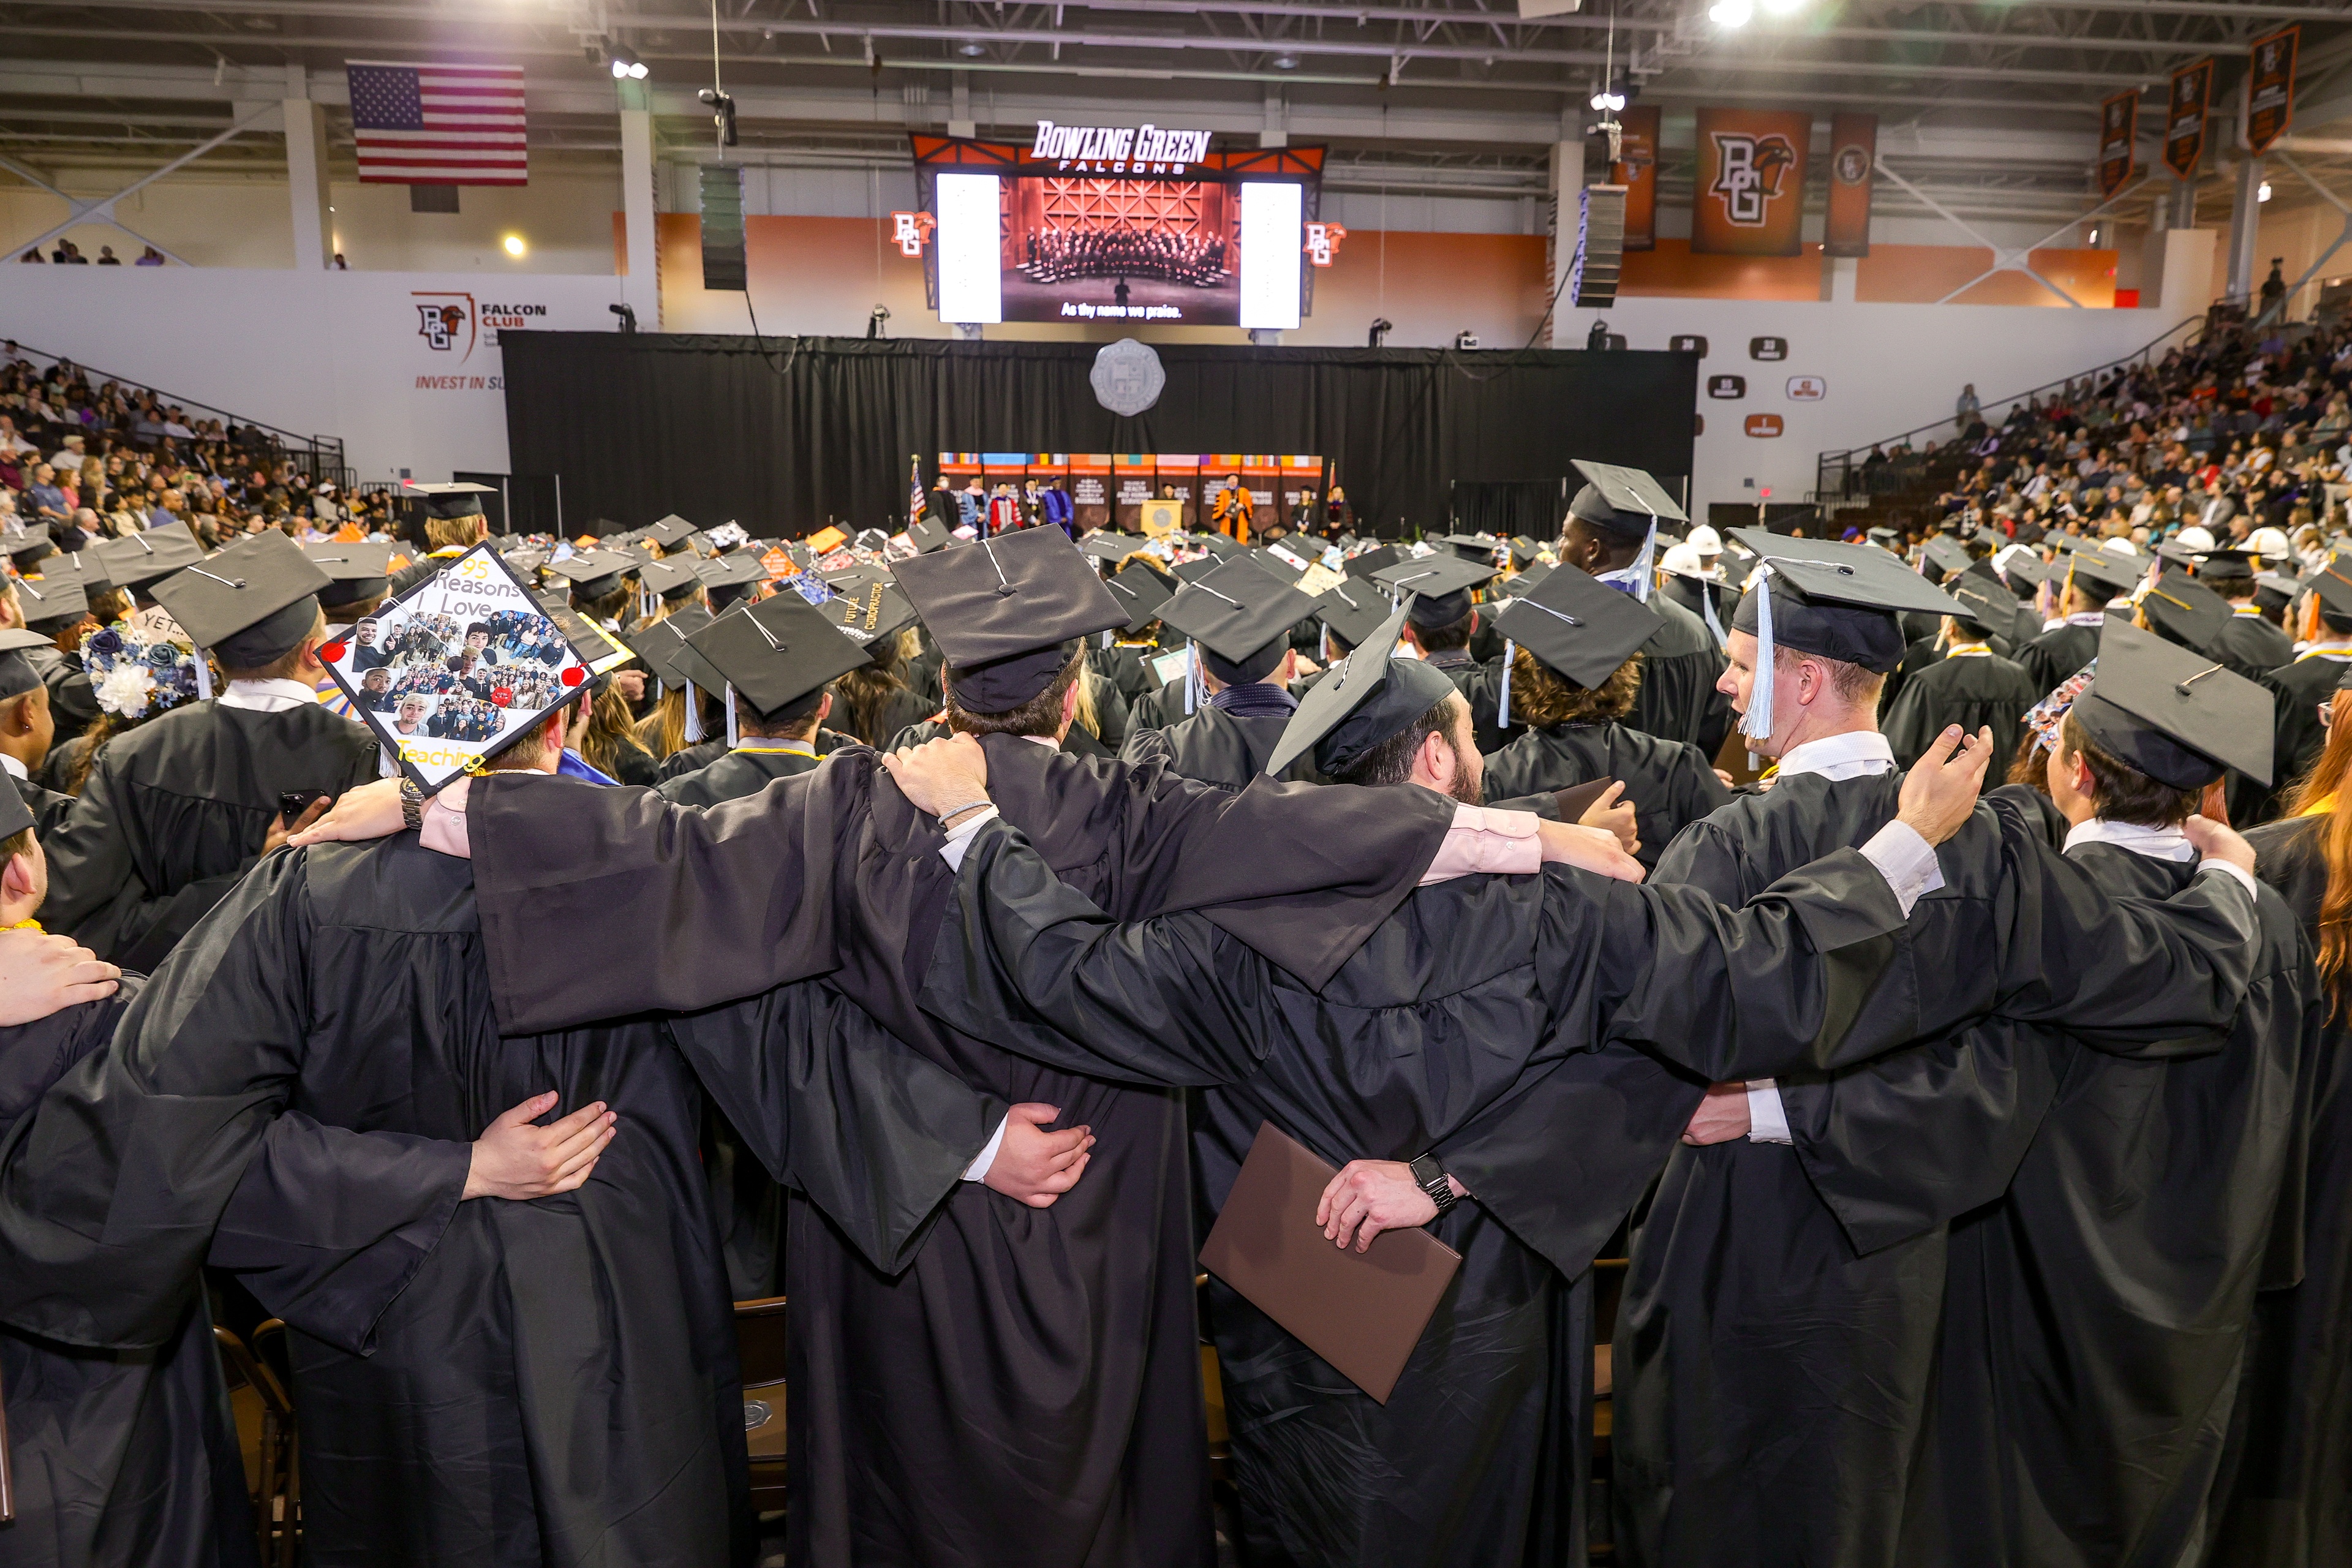 New BGSU graduates celebrate their accomplishments by singing the University's Alma Mater at Commencement